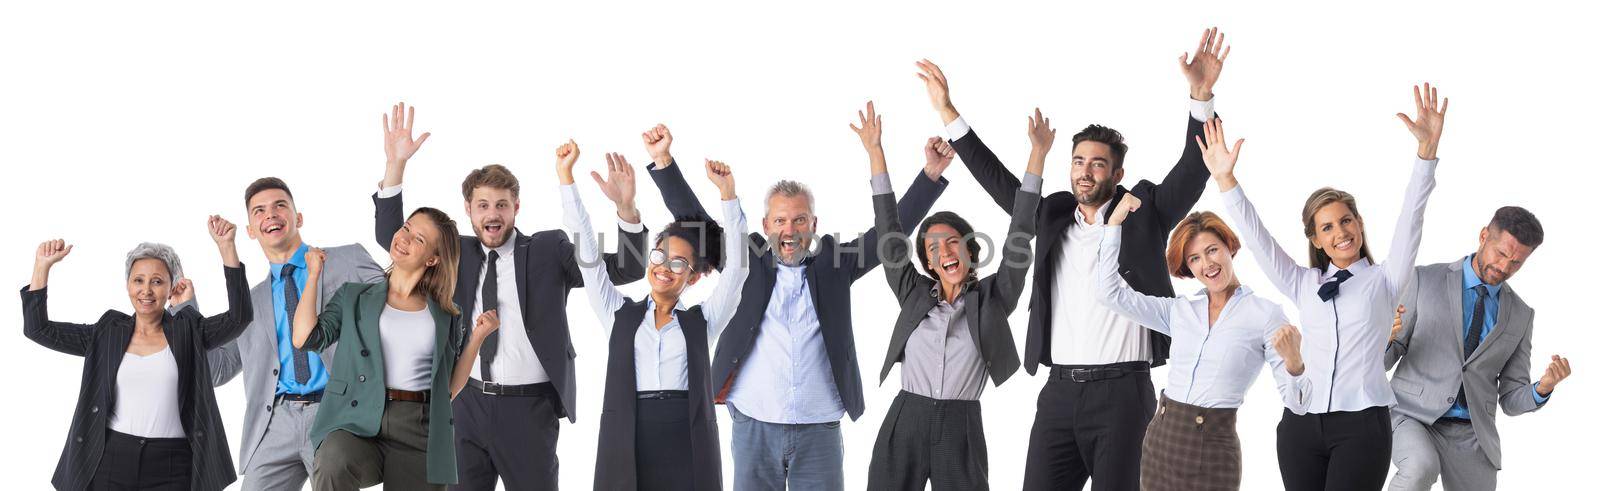 Happy Multi-racial Group Of Business People Raising Arms Isolated Over White Background